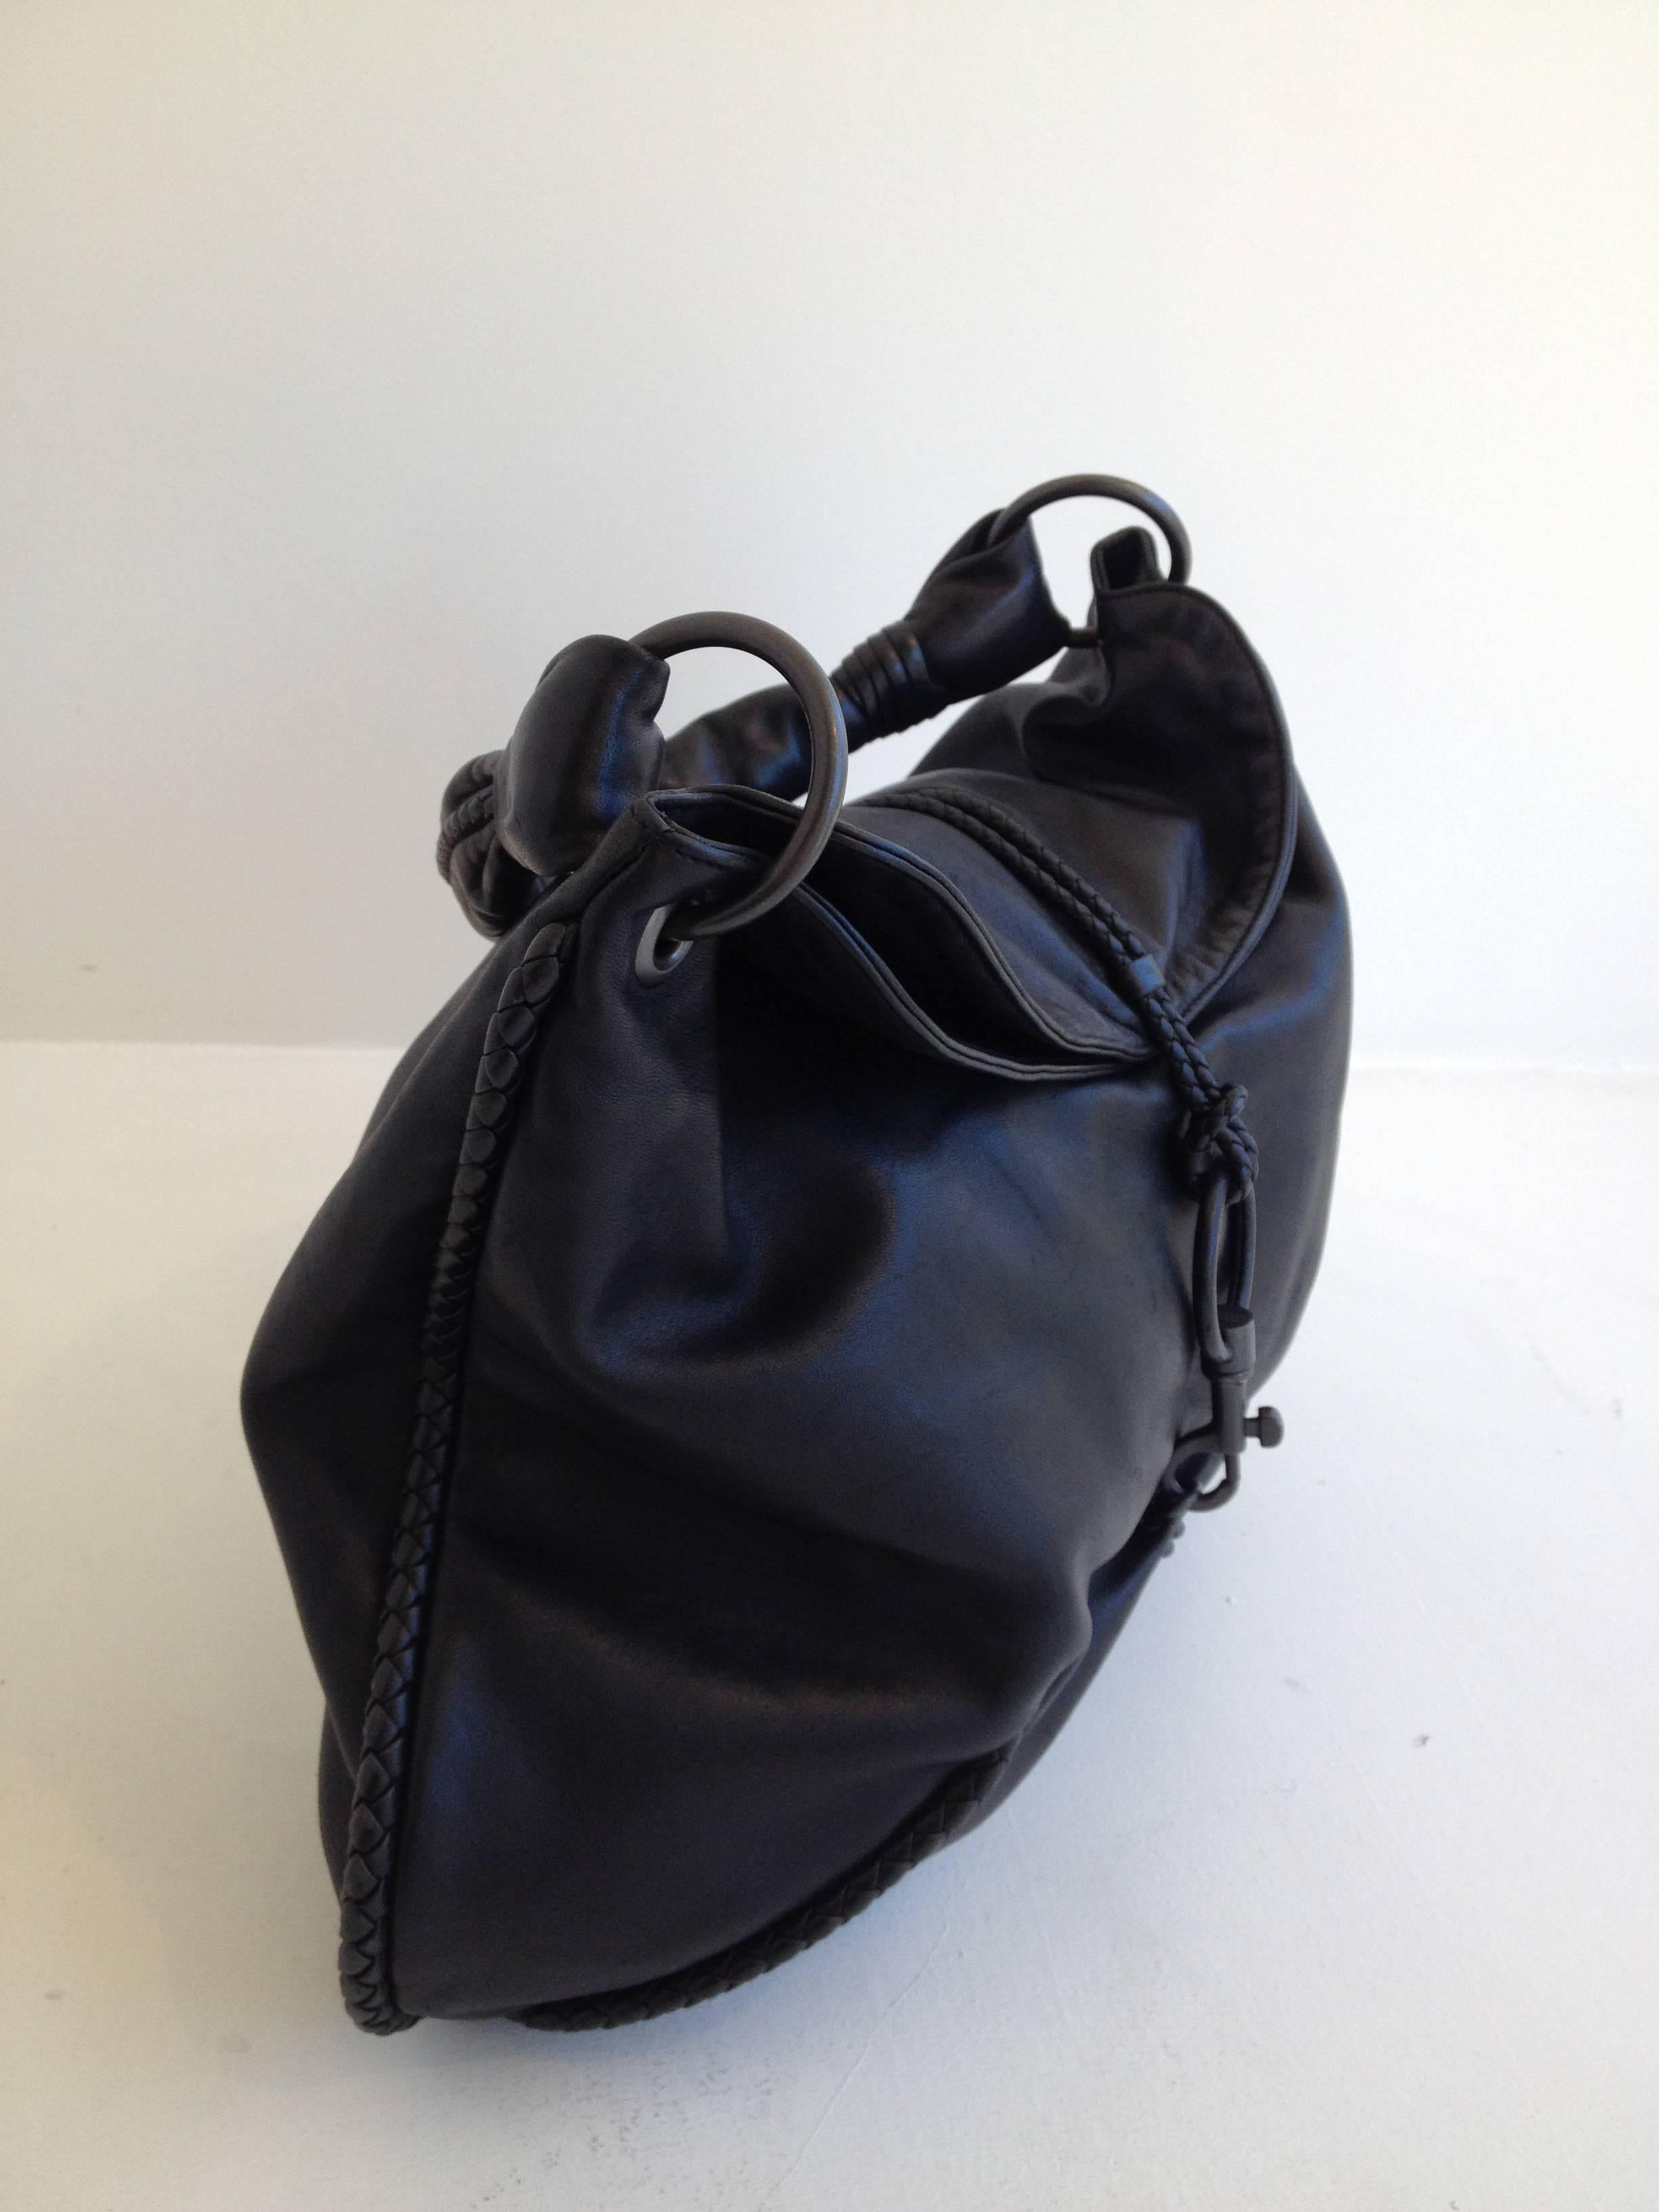 Made from ultra soft black leather and trimmed with little hints of iconic intrecciato trim, this bag is cool and contemporary while staying true to the Bottega legacy. Slouchy but polished, it features two slim woven cords that attach to the spring